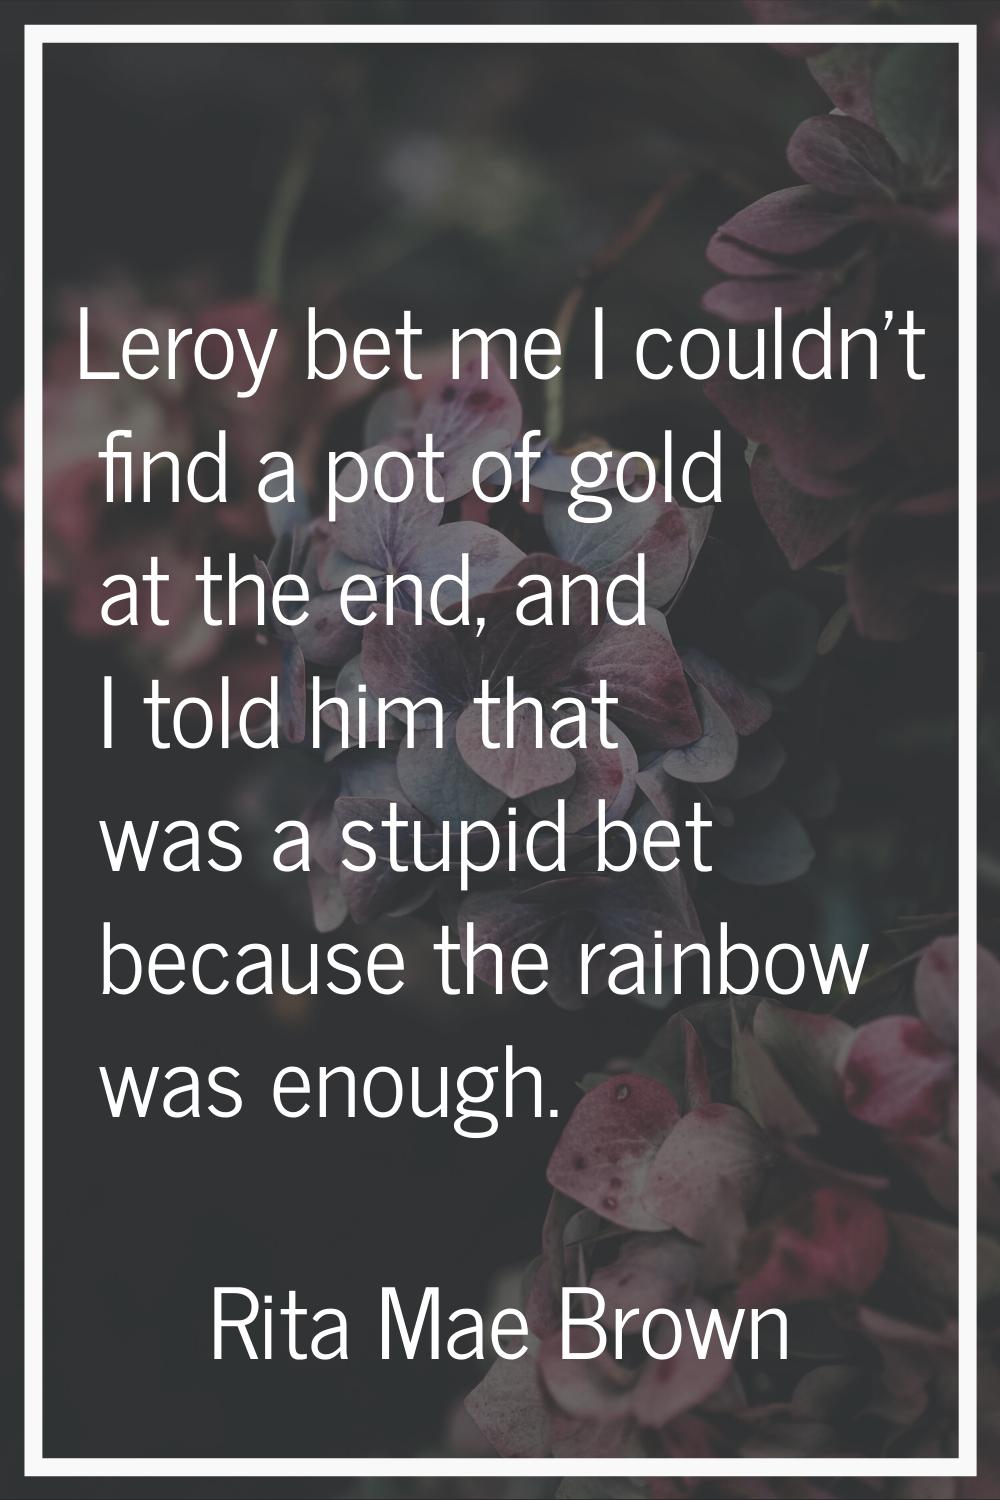 Leroy bet me I couldn't find a pot of gold at the end, and I told him that was a stupid bet because